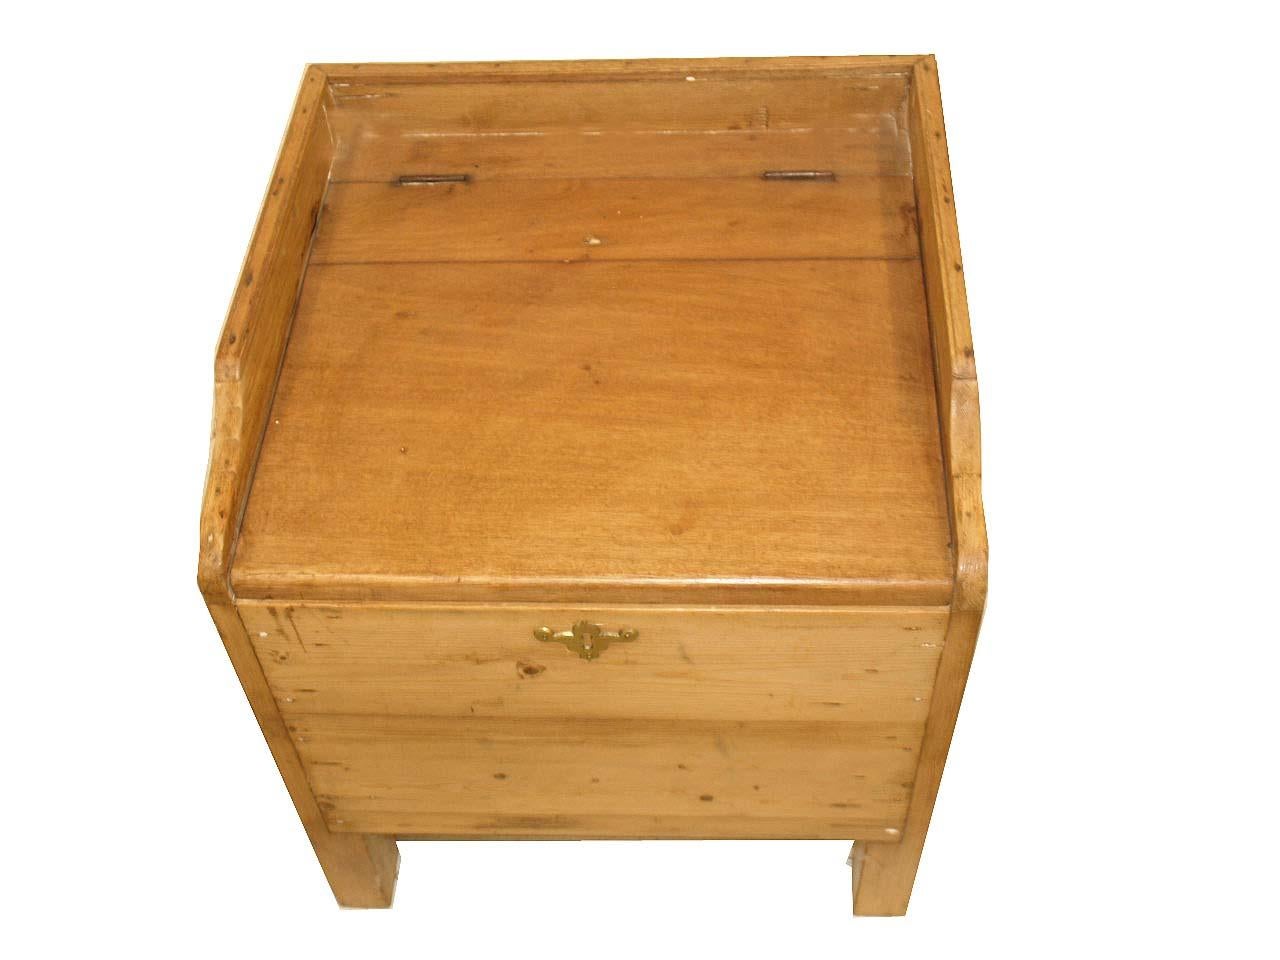 English pine end table, originally was a commode, the top is faded mahogany and lifts ( inside there is a hole , per photo, where the porcelain potty would have sat.) There is a gallery around the top ; the sides have carrying pulls. The table rests